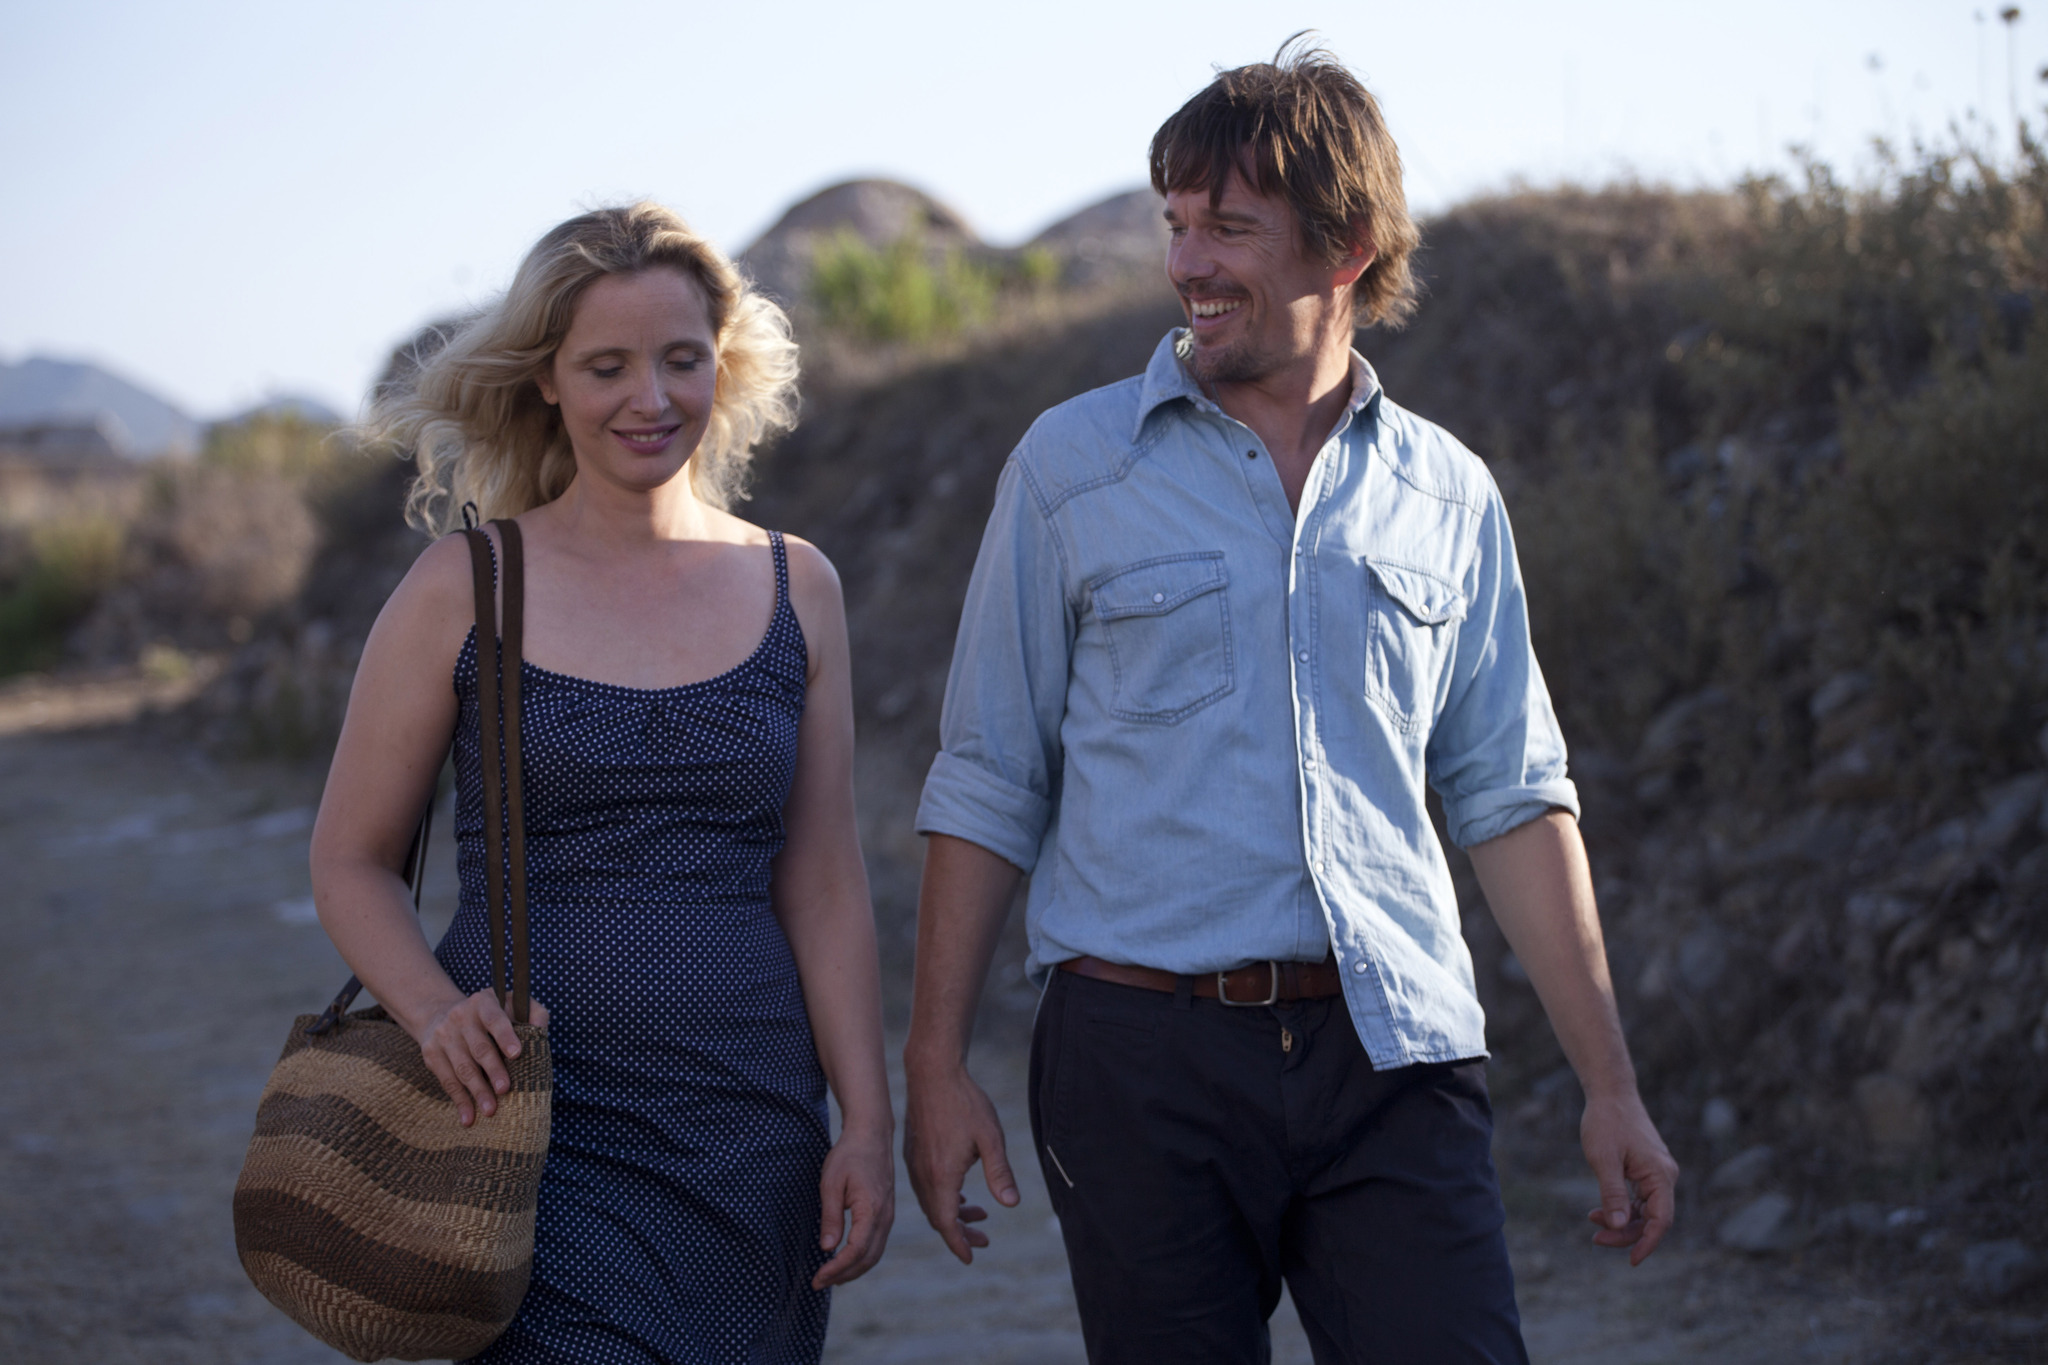 Still of Ethan Hawke and Julie Delpy in Pries vidurnakti (2013)